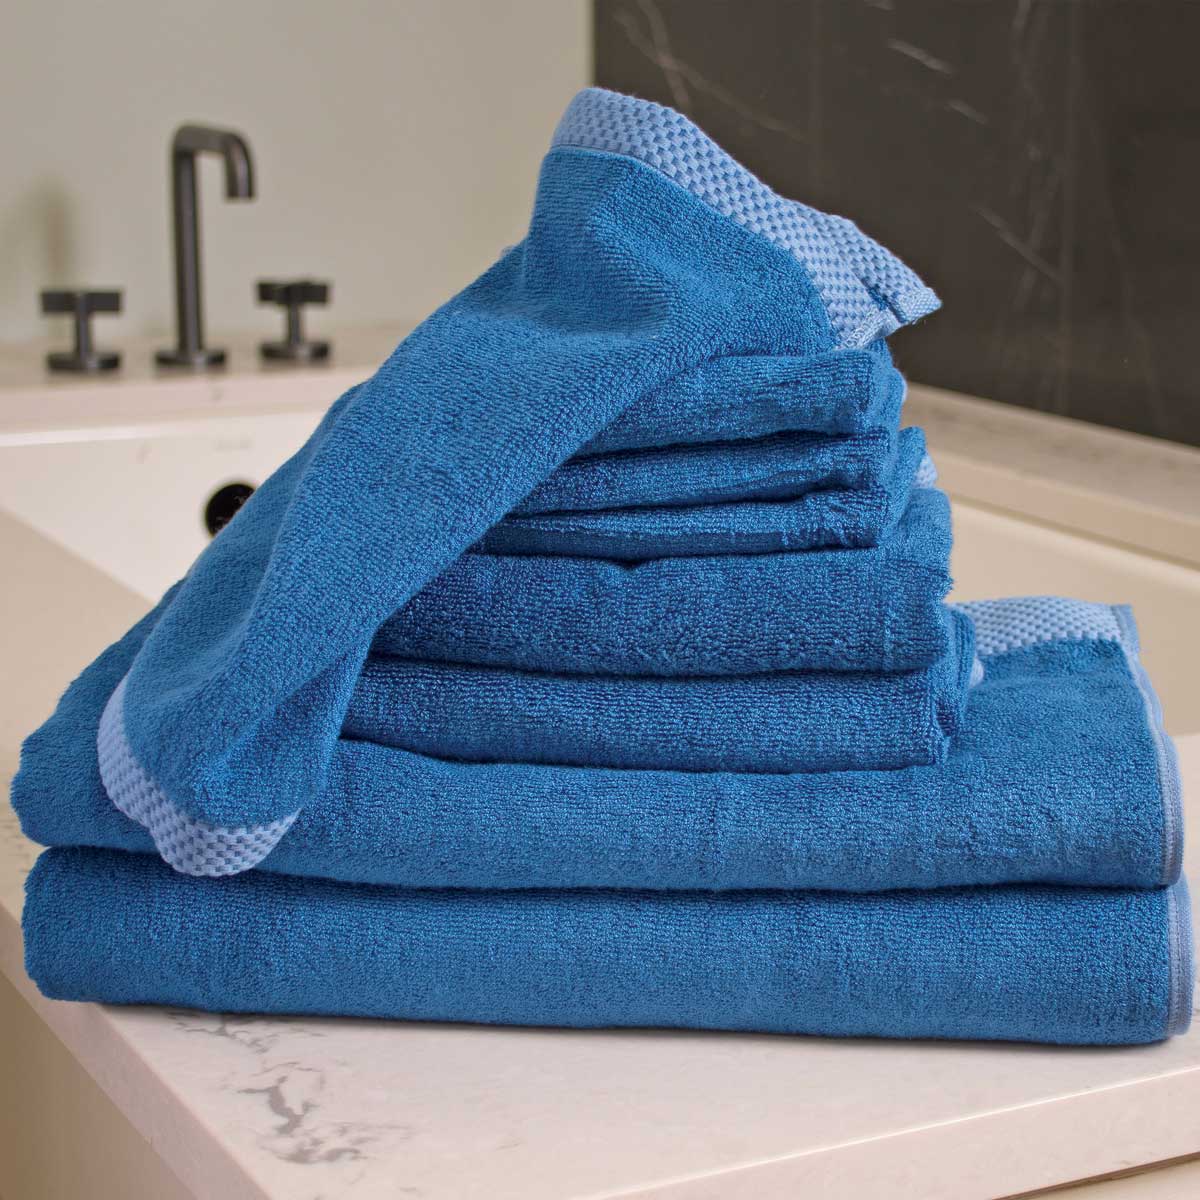 Bamboo Bliss Resort Bamboo Collection by RHH Bath Towels - Hand Towel